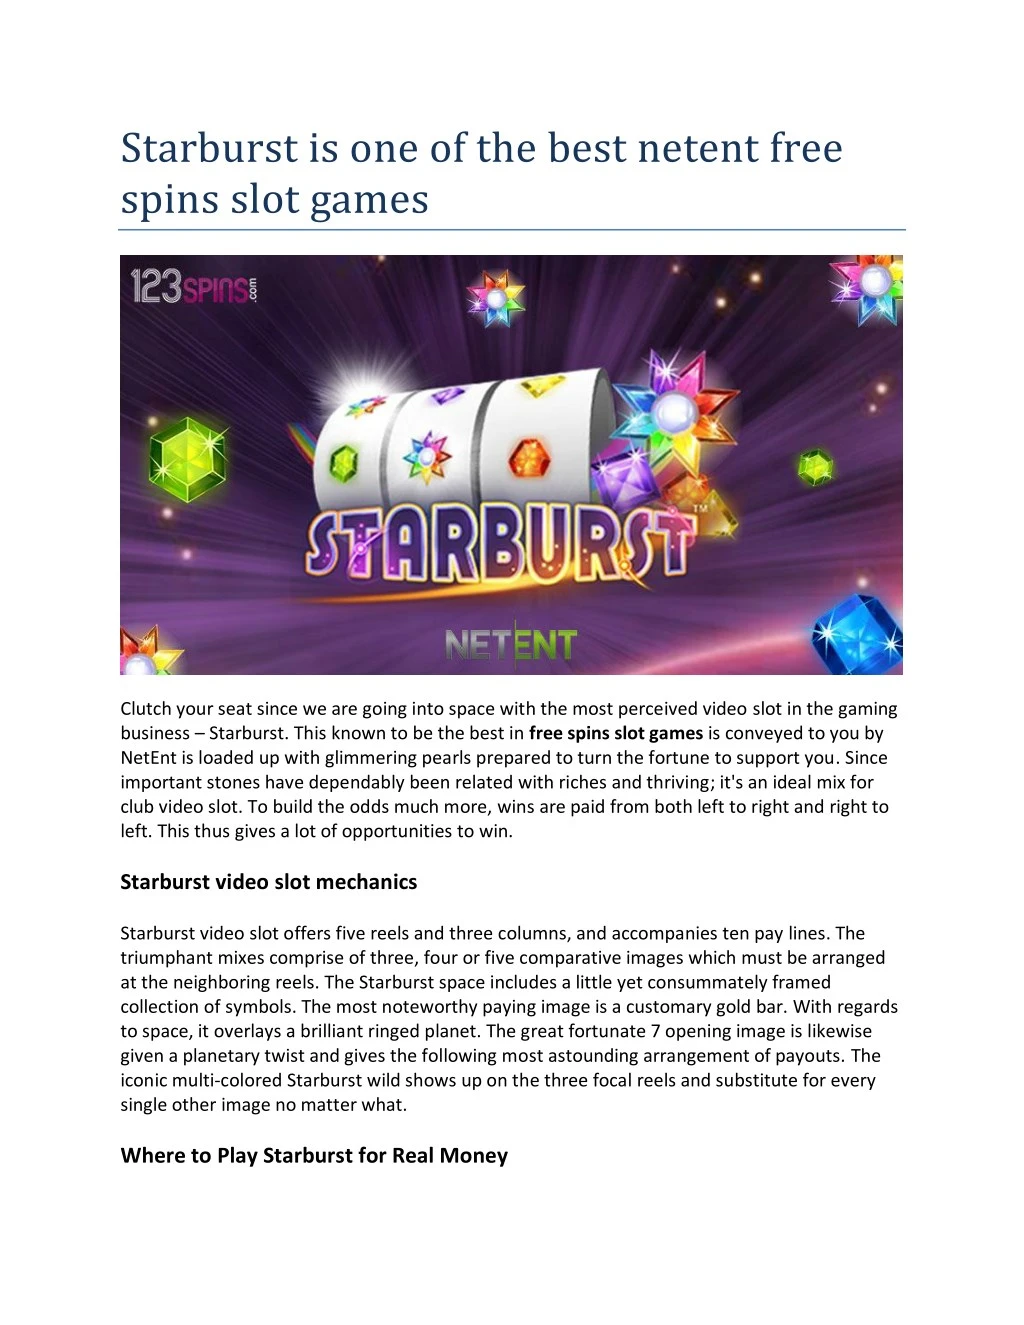 starburst is one of the best netent free spins